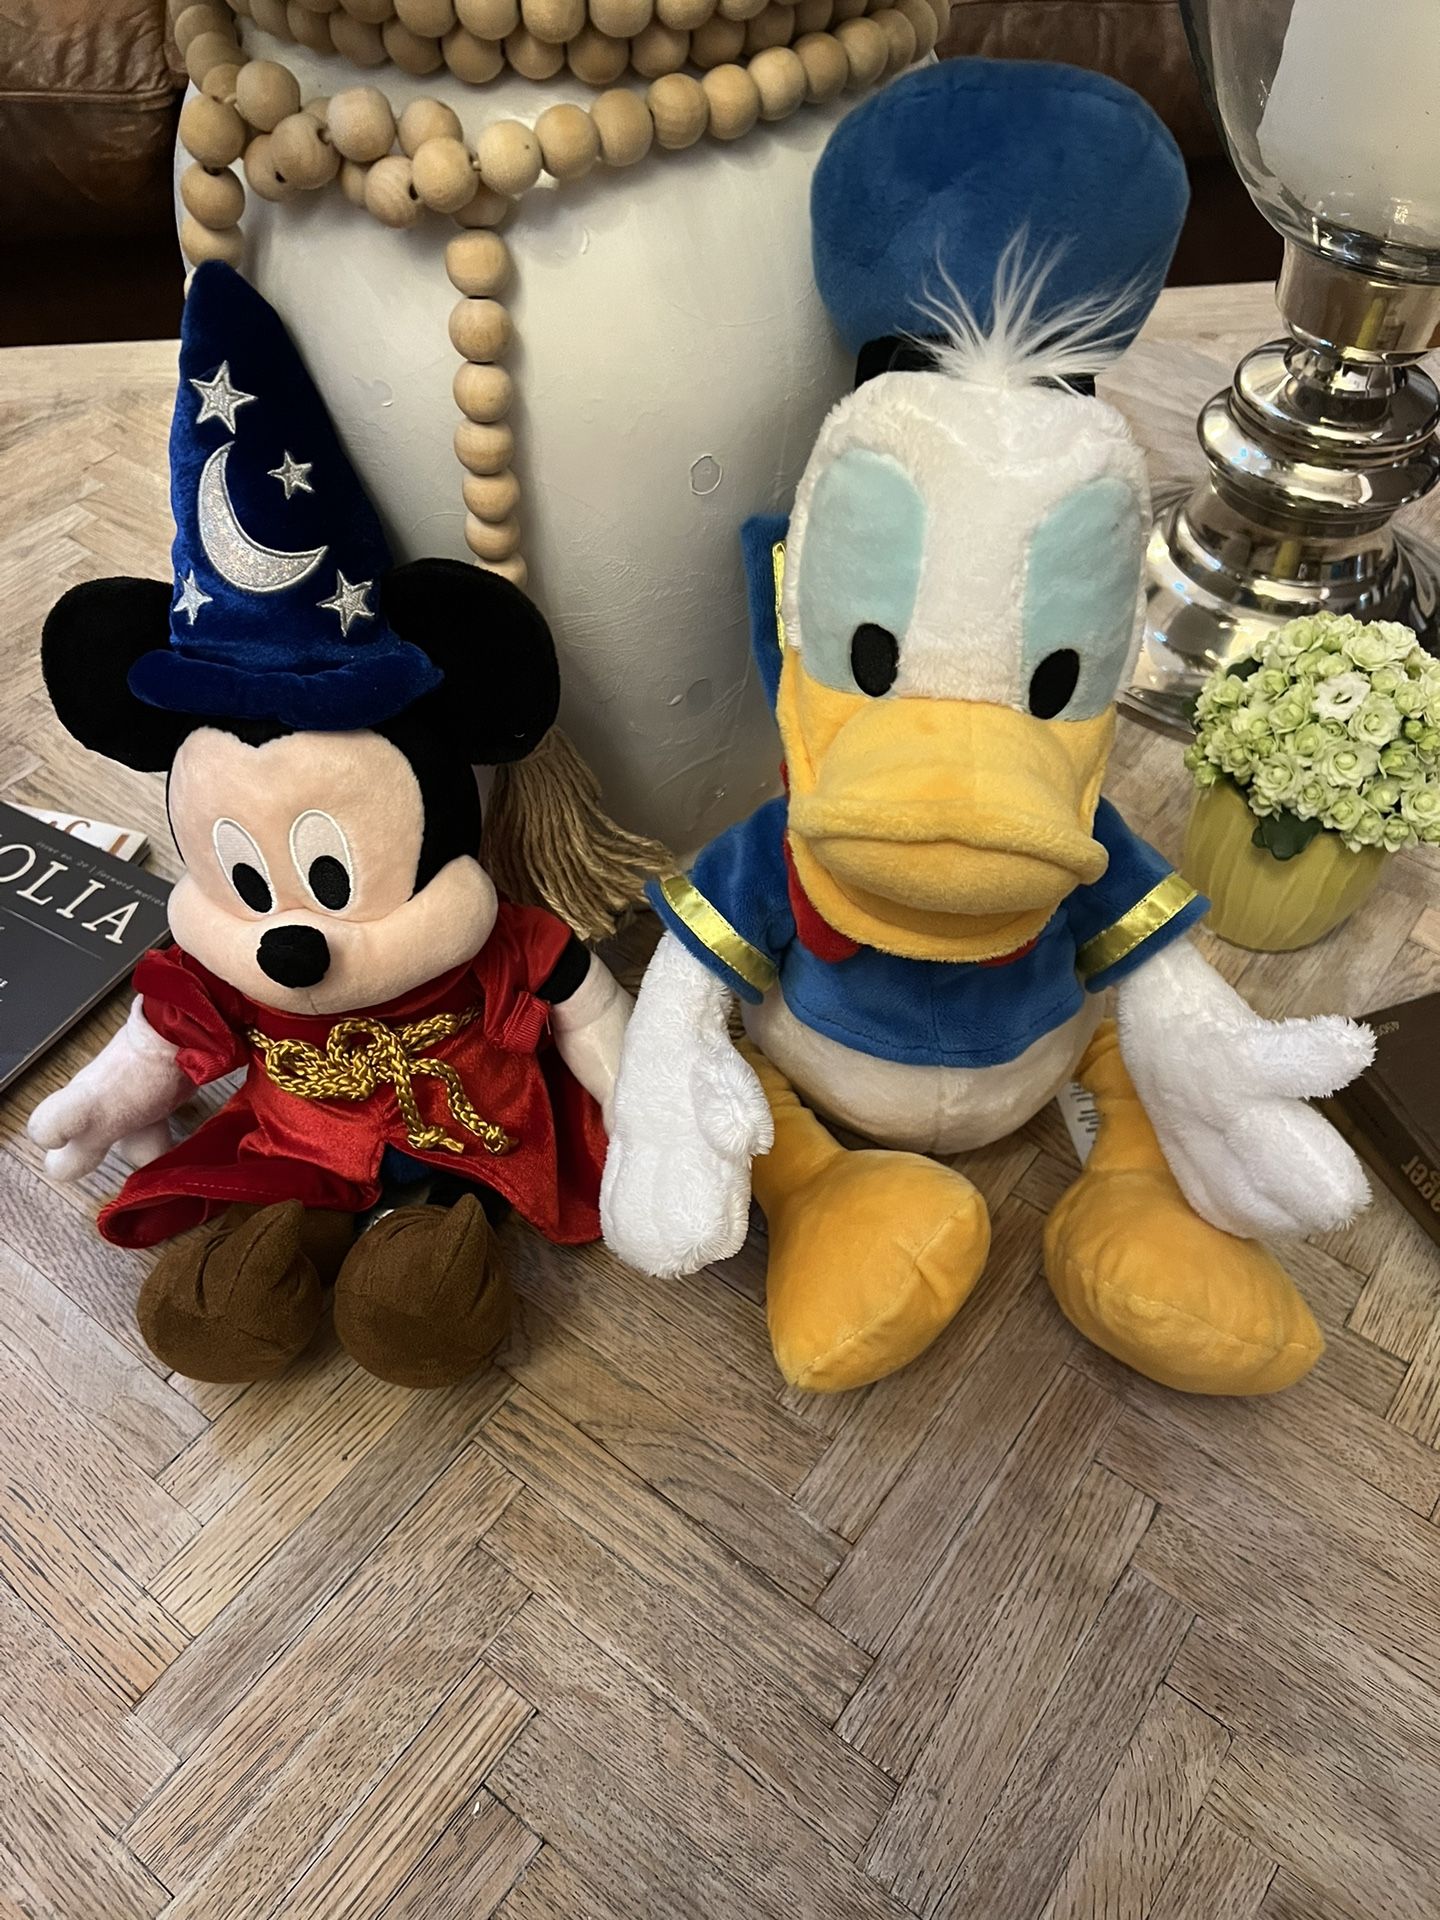 Mickey wizard and Donald Duck plushy $20 For Both